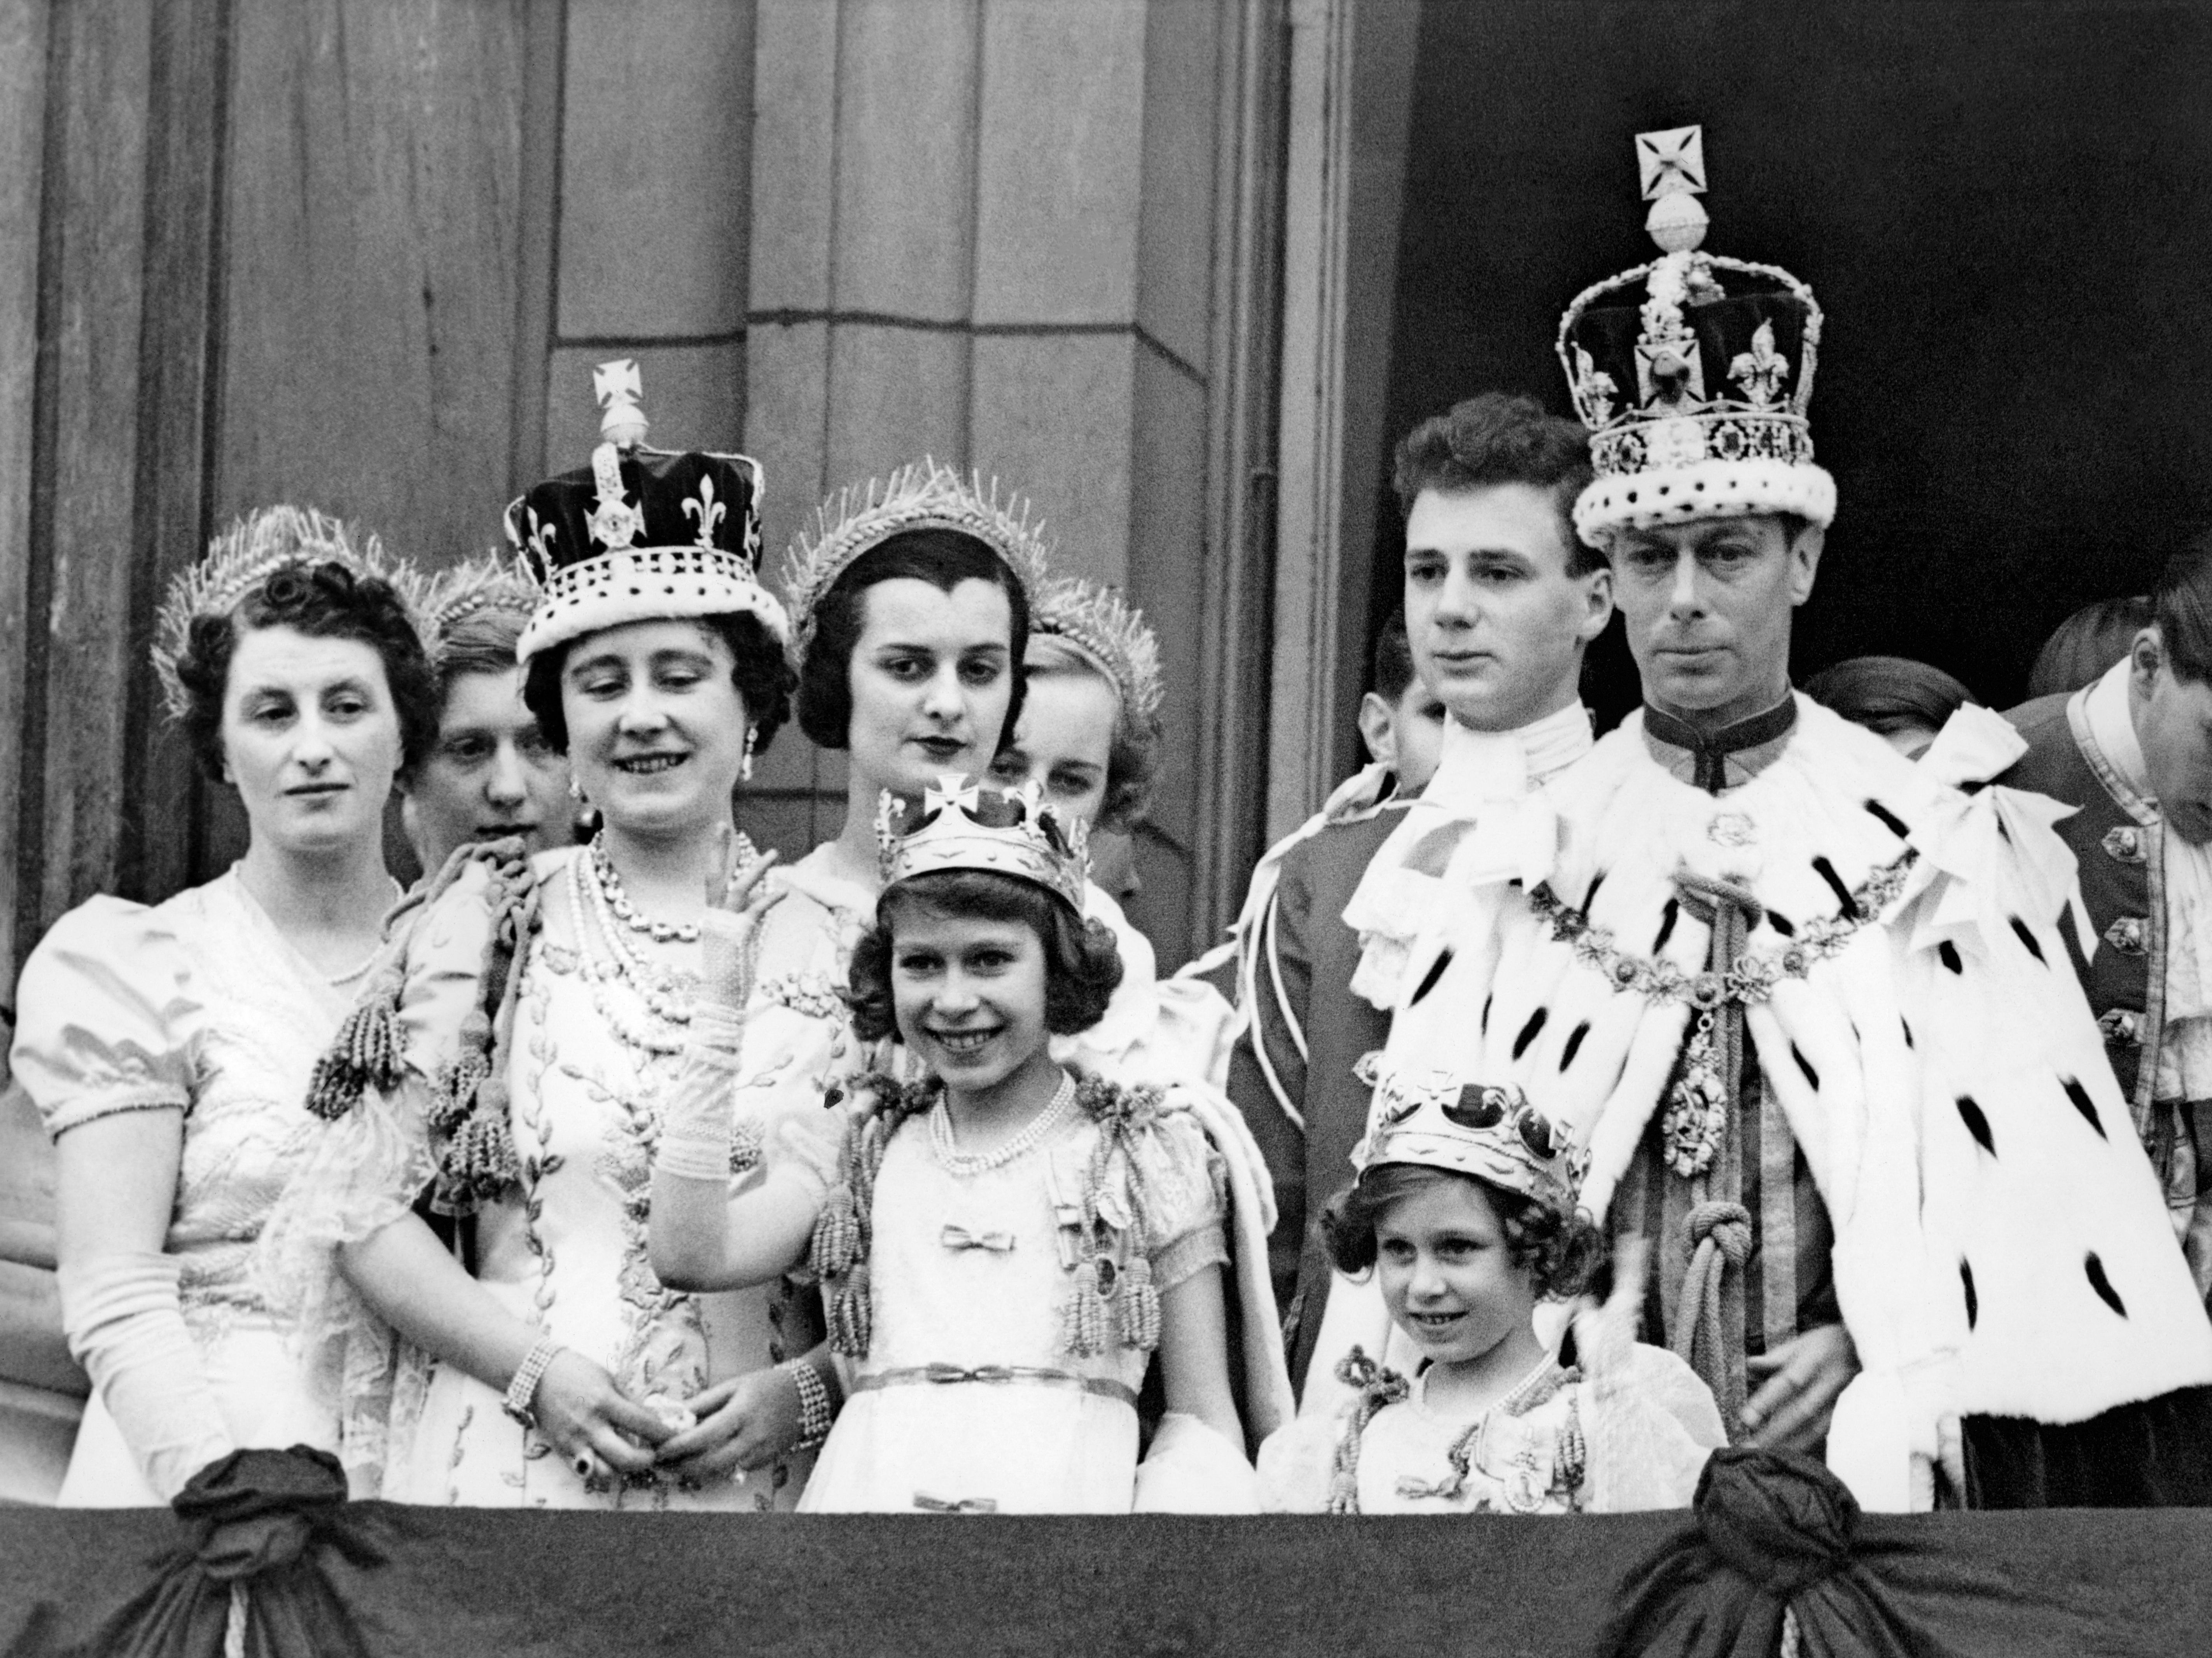 Queen Elizabeth (2nd-L, future Queen Mother), her daughter Princess Elizabeth (4th-L, future Queen Elizabeth II), Queen Mary (C) , Princess Margaret (5th-L) and the King George VI (R), pose at the balcony of the Buckingham Palace on May 12, 1937